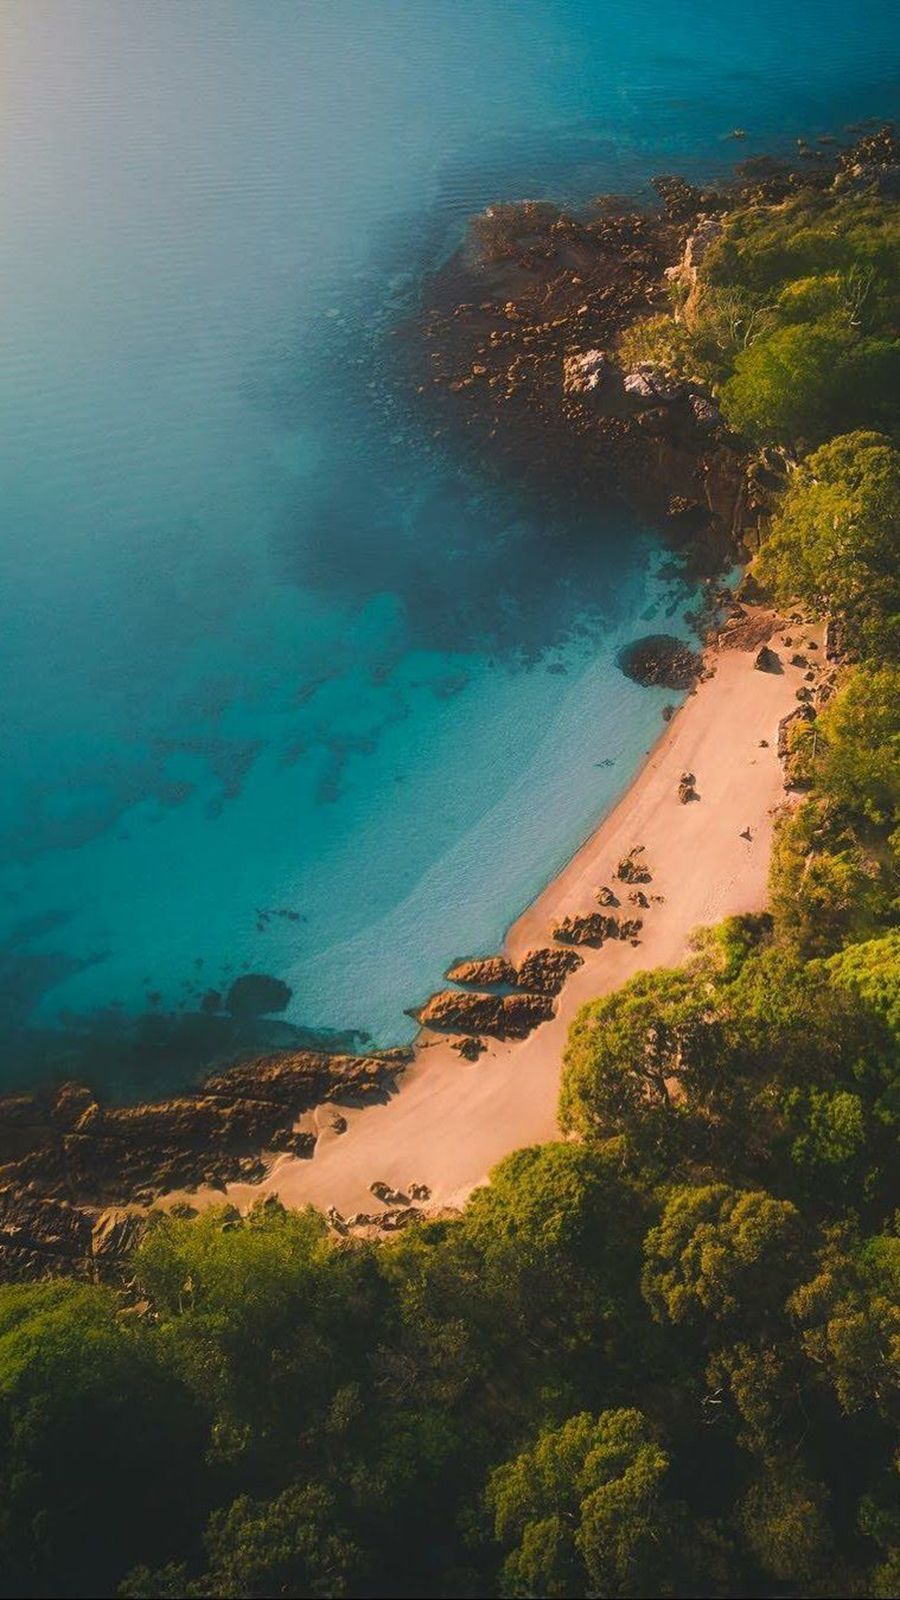 Aerial view of a beach surrounded by trees - Nature